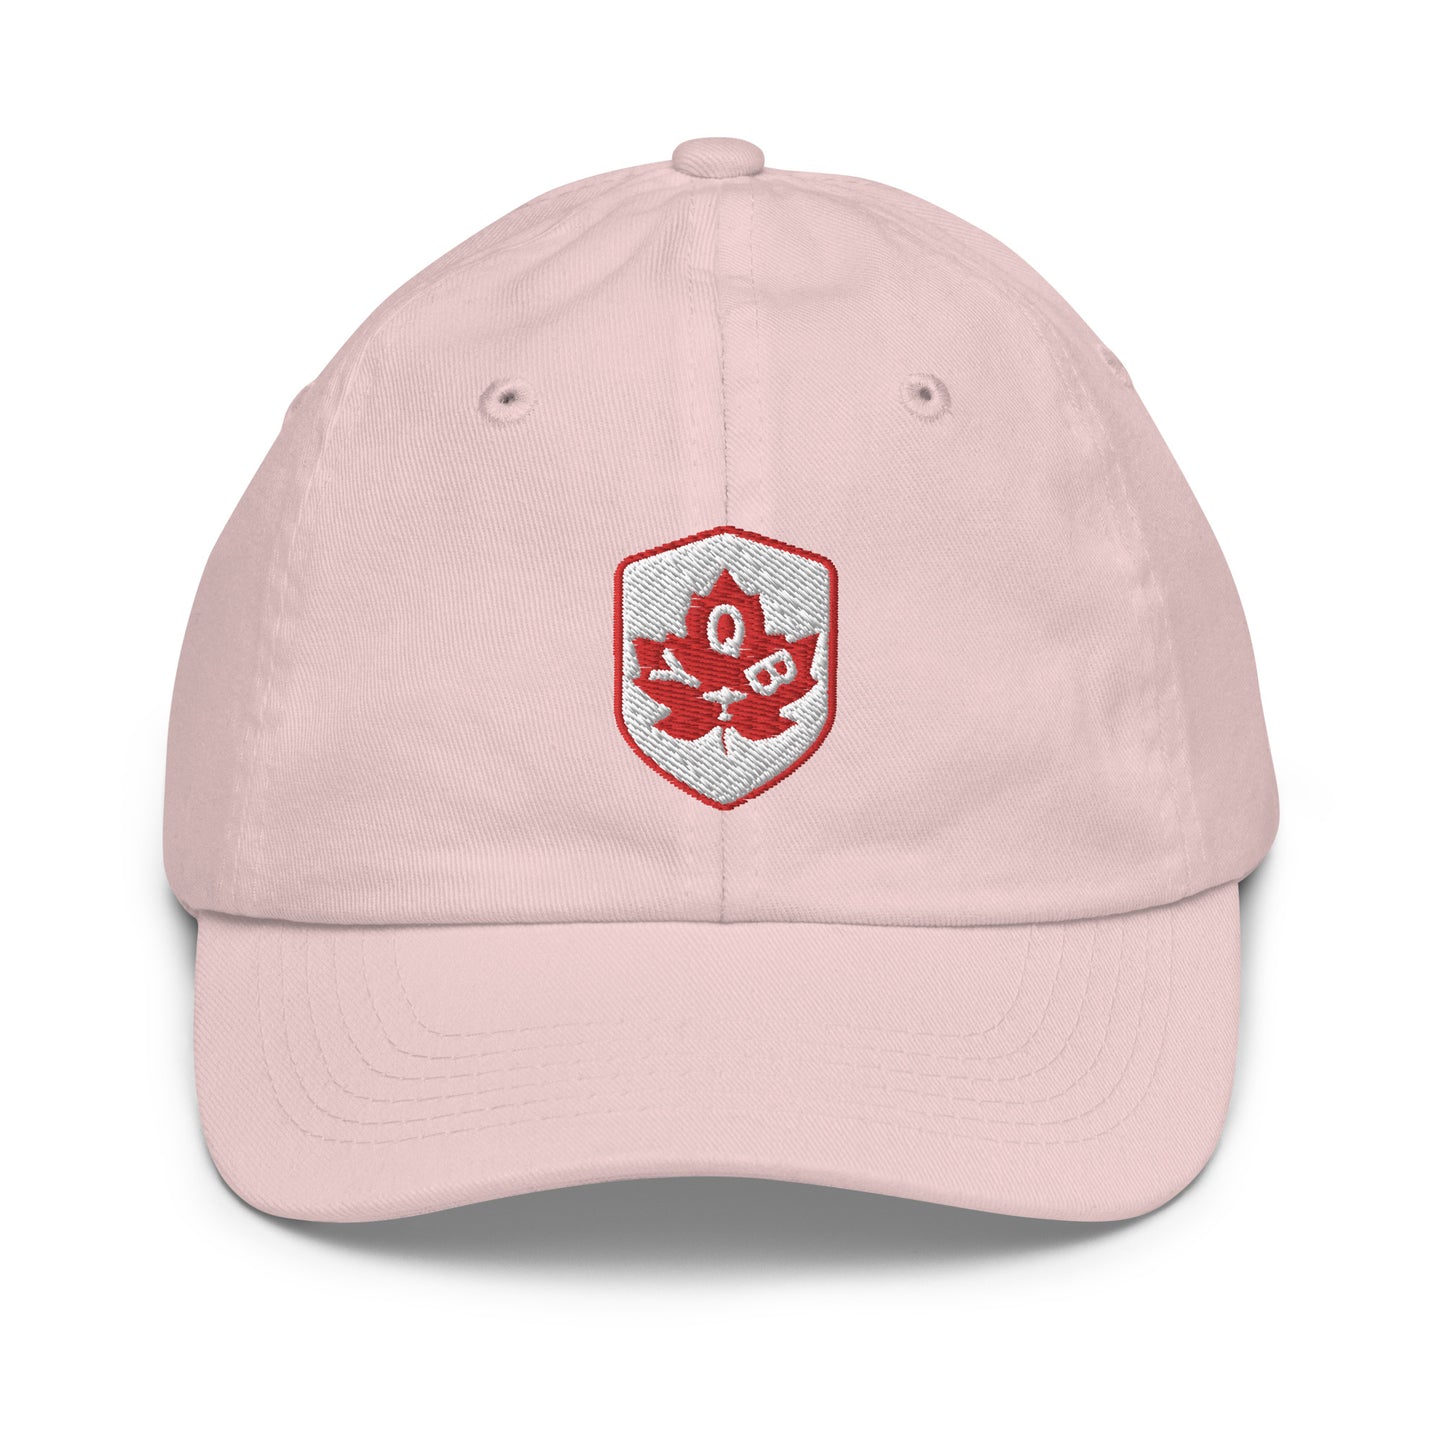 Maple Leaf Kid's Cap - Red/White • YQB Quebec City • YHM Designs - Image 24